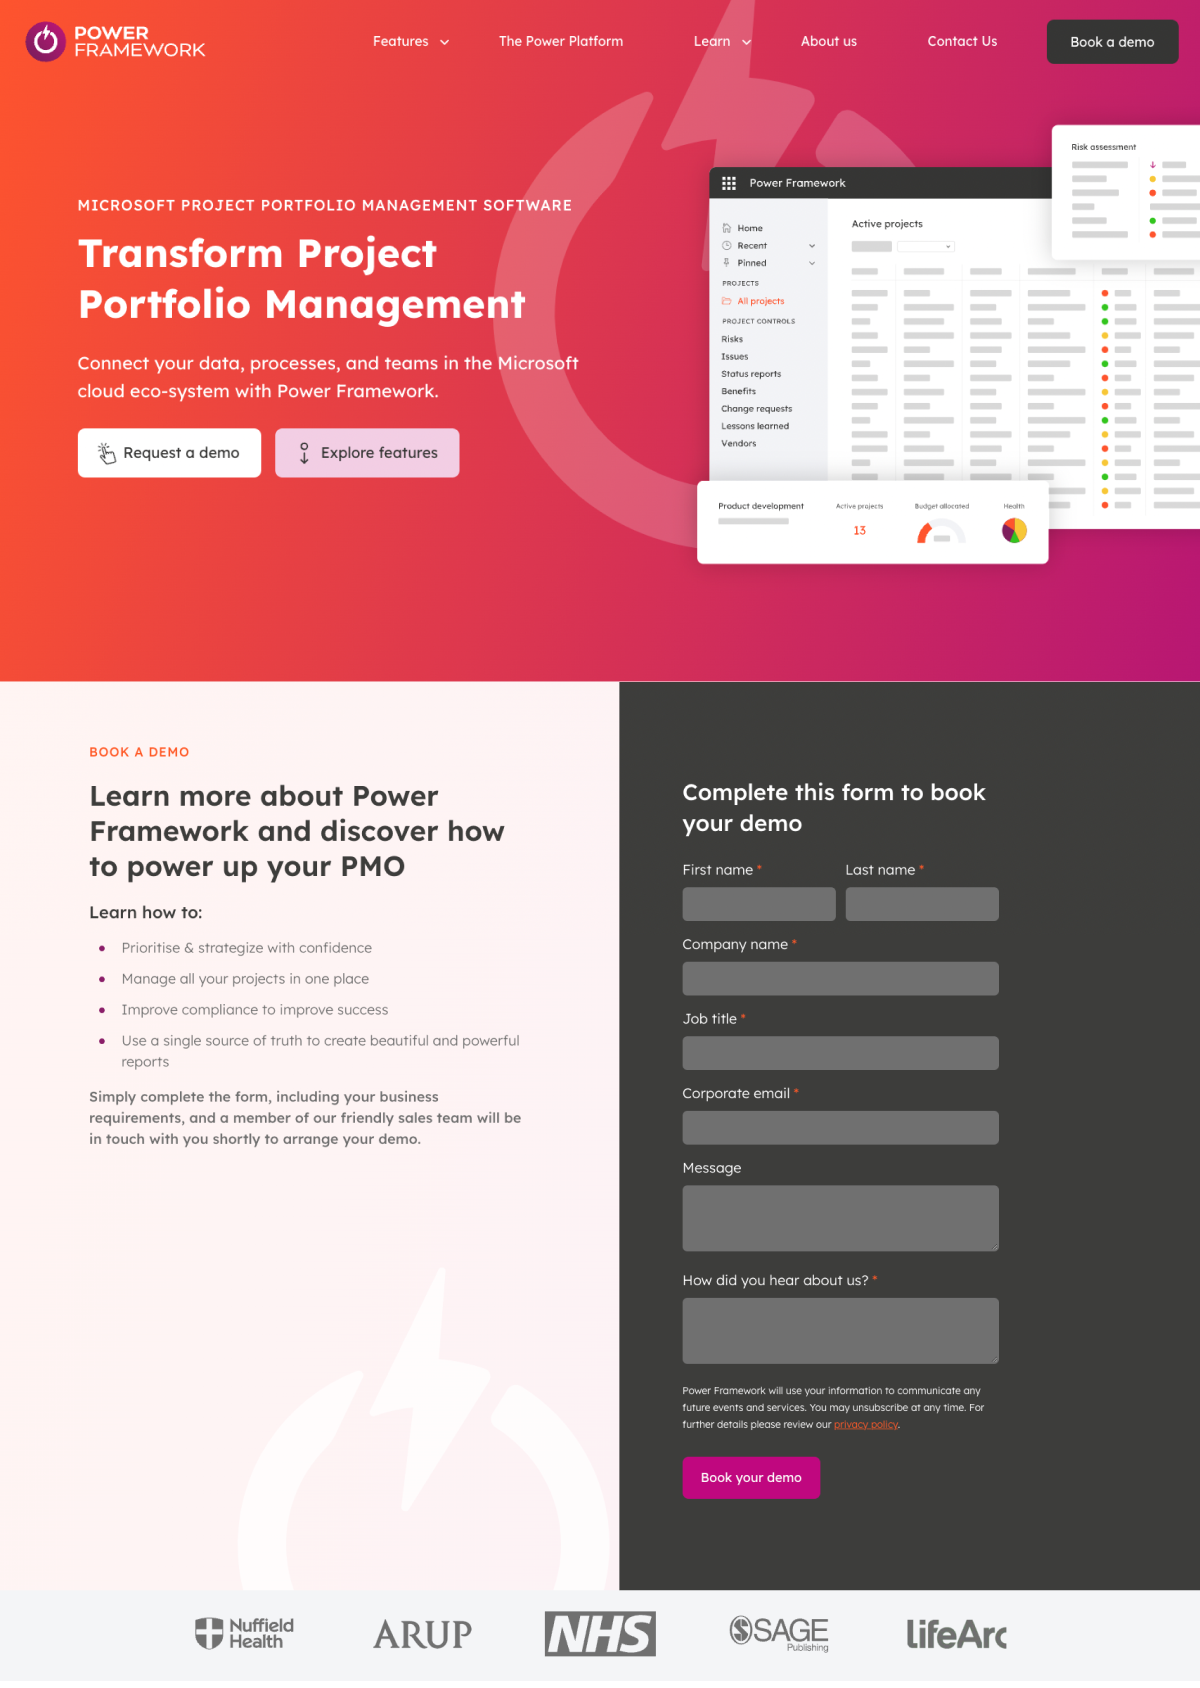 Power Framework and lead generation form on their website